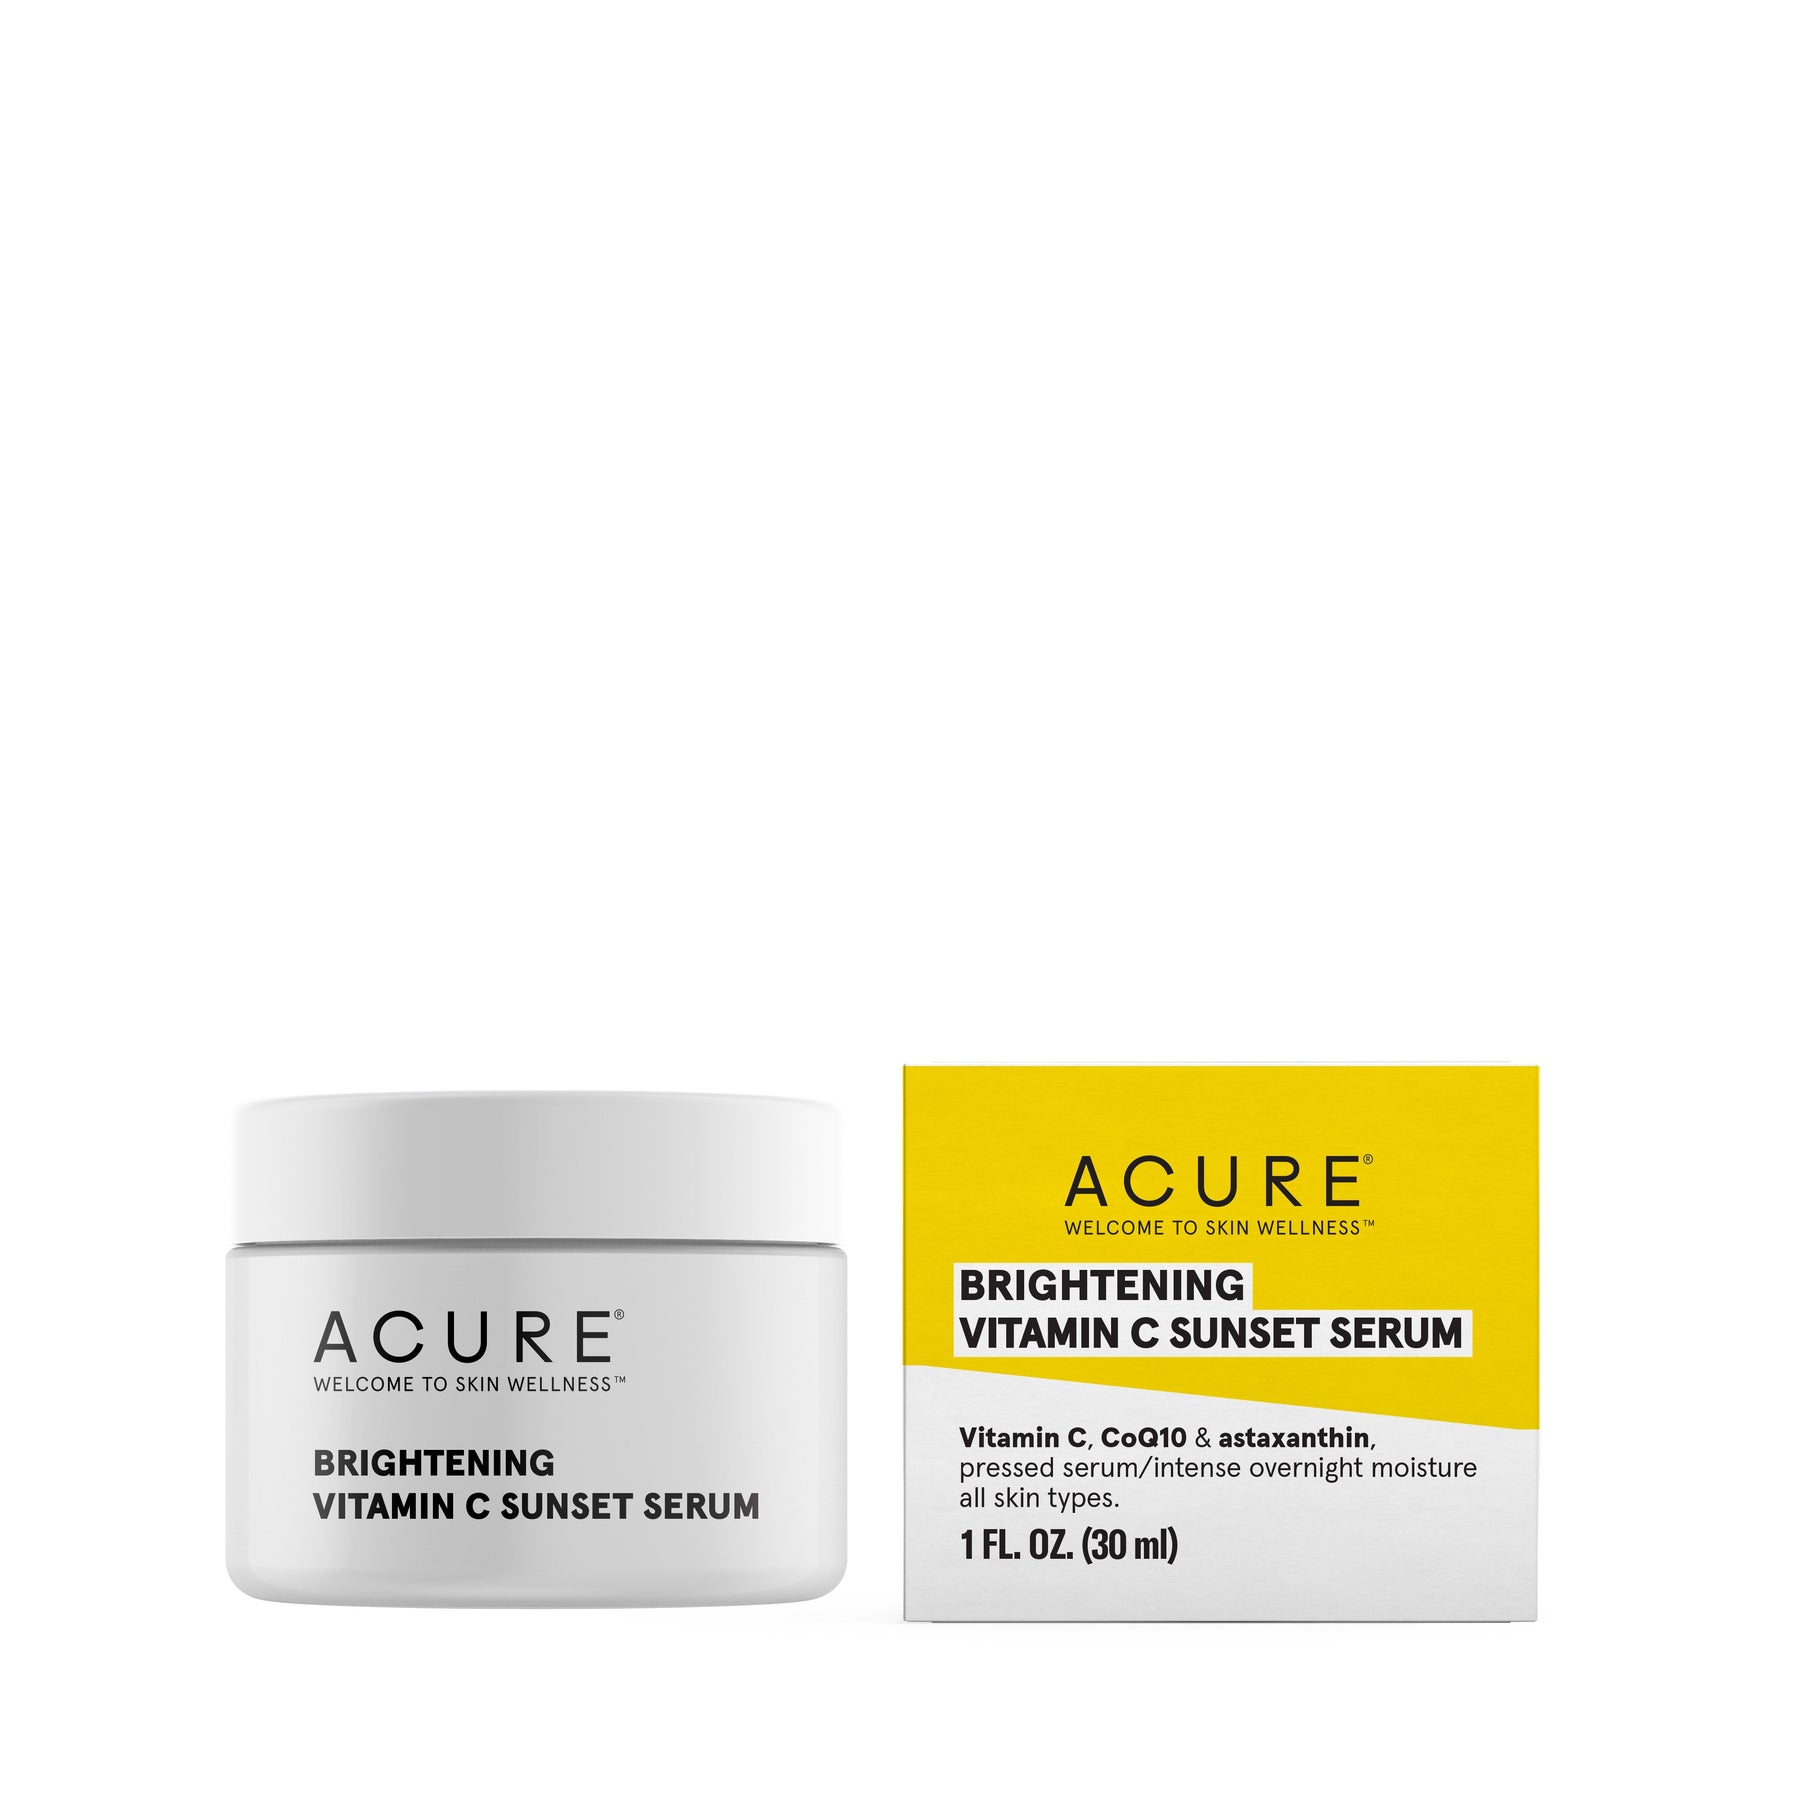 ACURE - Vitamin C Sunset Serum - by Acure |ProCare Outlet|